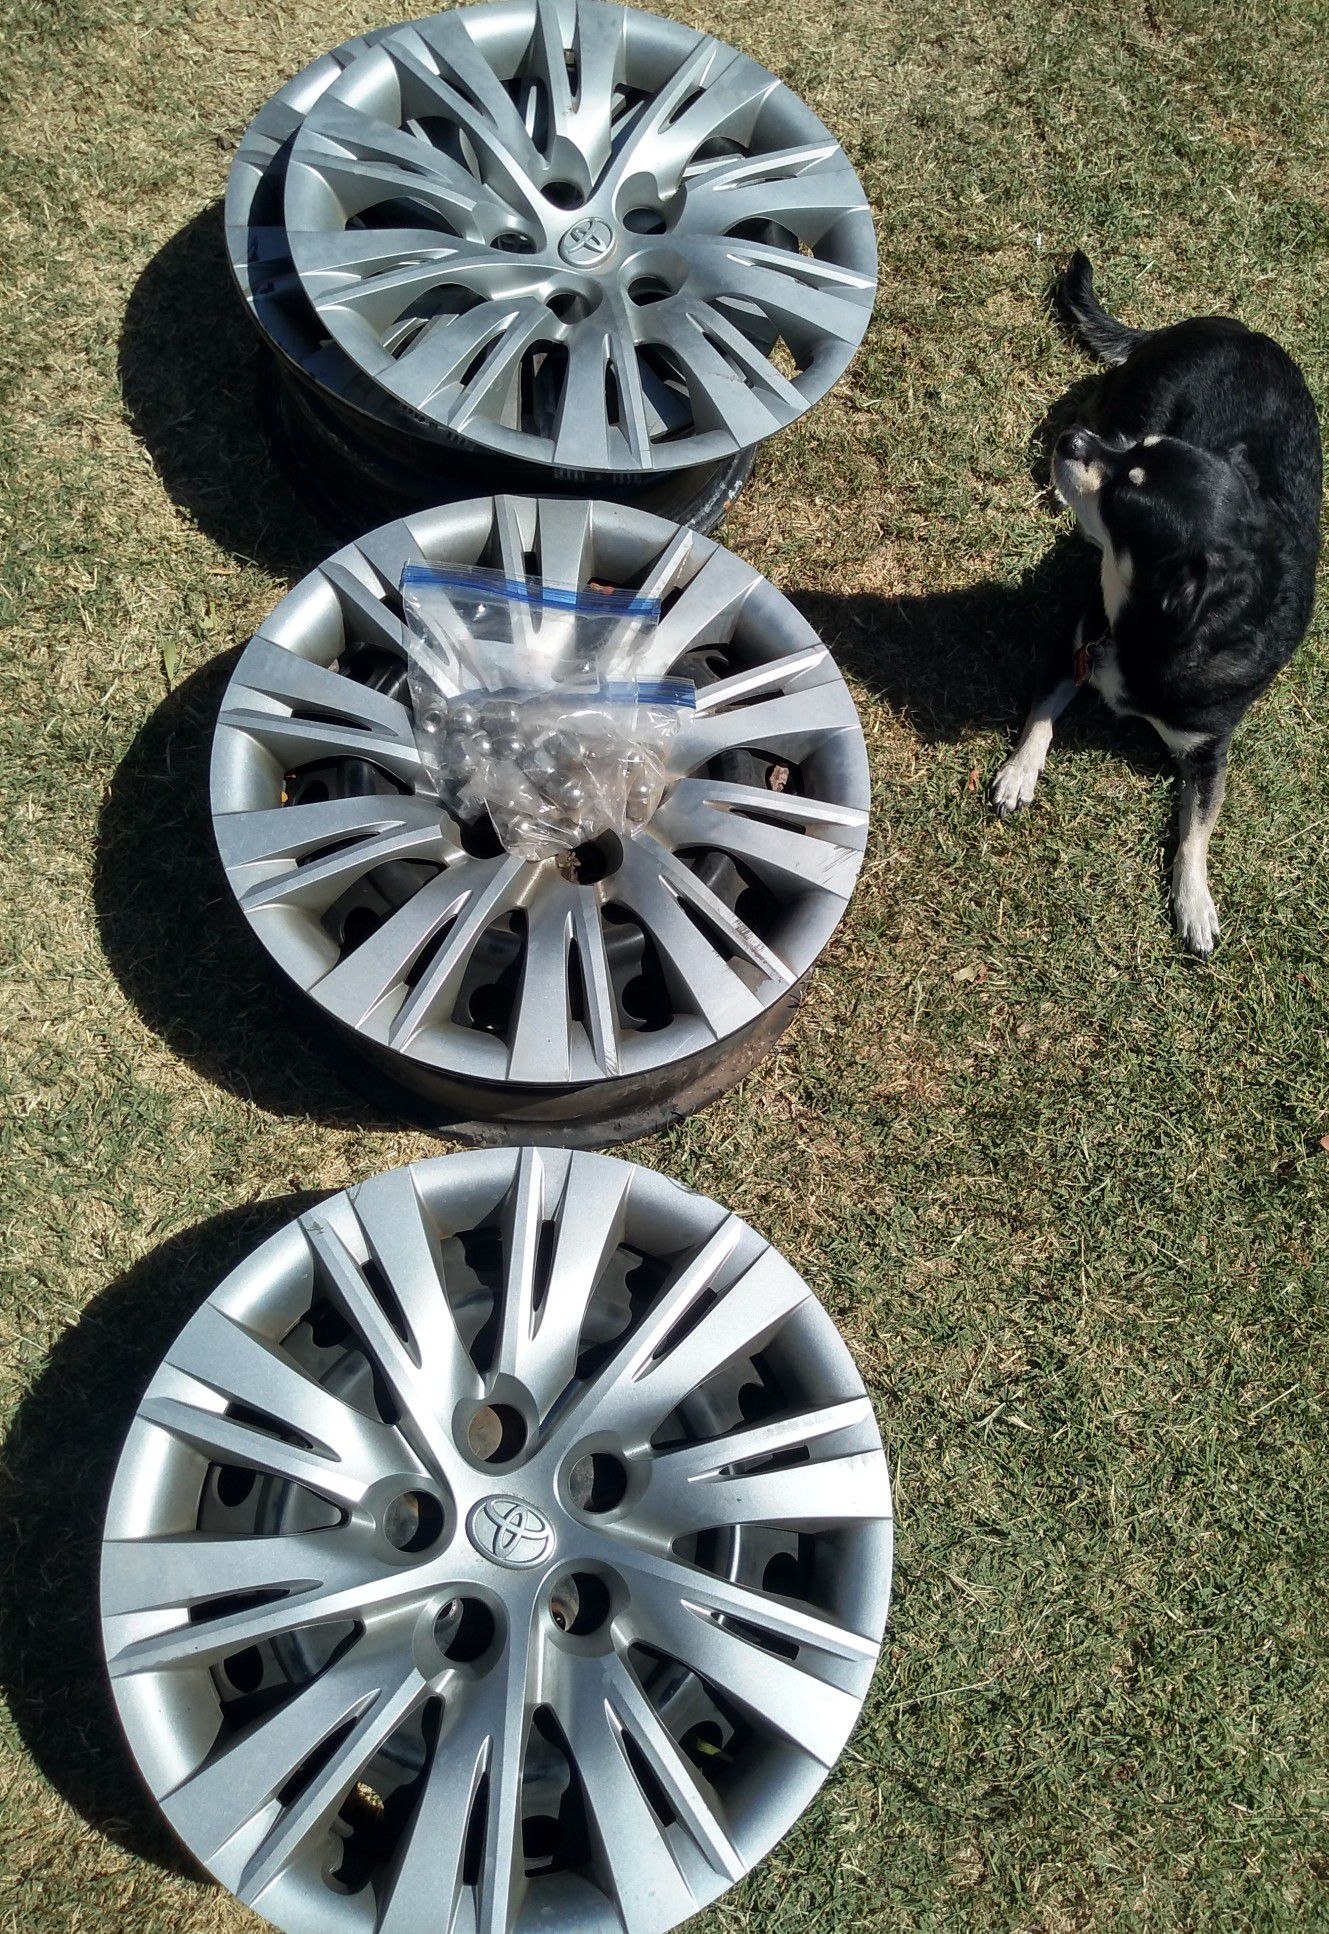 Toyota Camry wheel covers and/ or steel rims